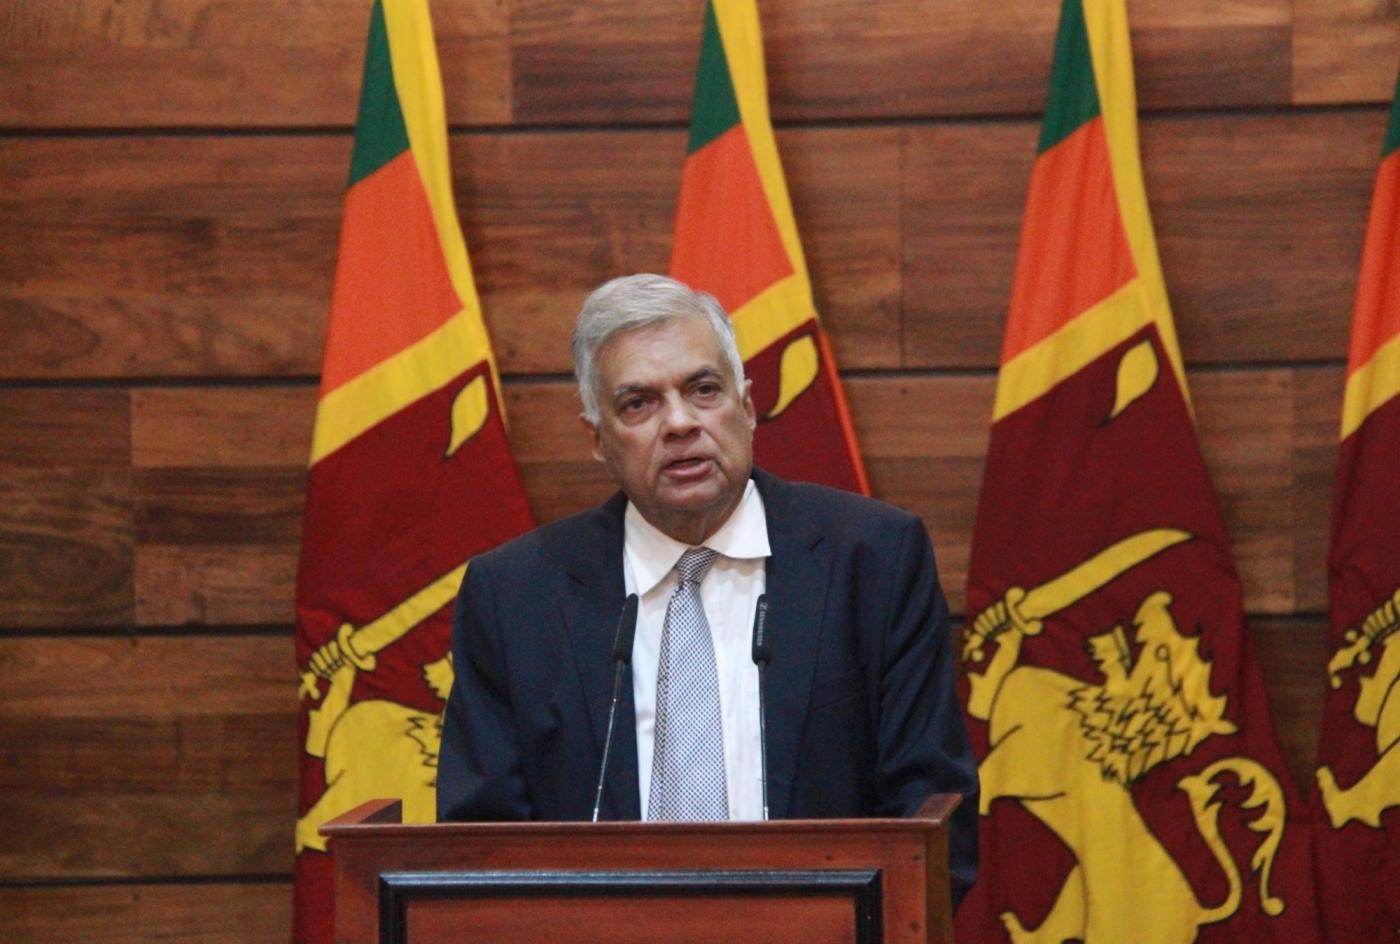 COLOMBO, April 23, 2019 (Xinhua) -- Sri Lankan Prime Minister Ranil Wickremesinghe speaks at a press conference in Colombo, Sri Lanka, April 23, 2019. Sri Lankan Prime Minister Ranil Wickremesinghe said on Tuesday that authorities are making progress in identifying the culprits of the series of bombing attacks and evidence had been found on foreign links of the attacks. At a press conference in Temple Trees, Wickremesinghe said that authorities are looking at the claim by Islamic State (IS) that they are responsible for the blasts that killed more than 300 people and injured over 500 others. (Xinhua/Yang Zhou/IANS) by . 